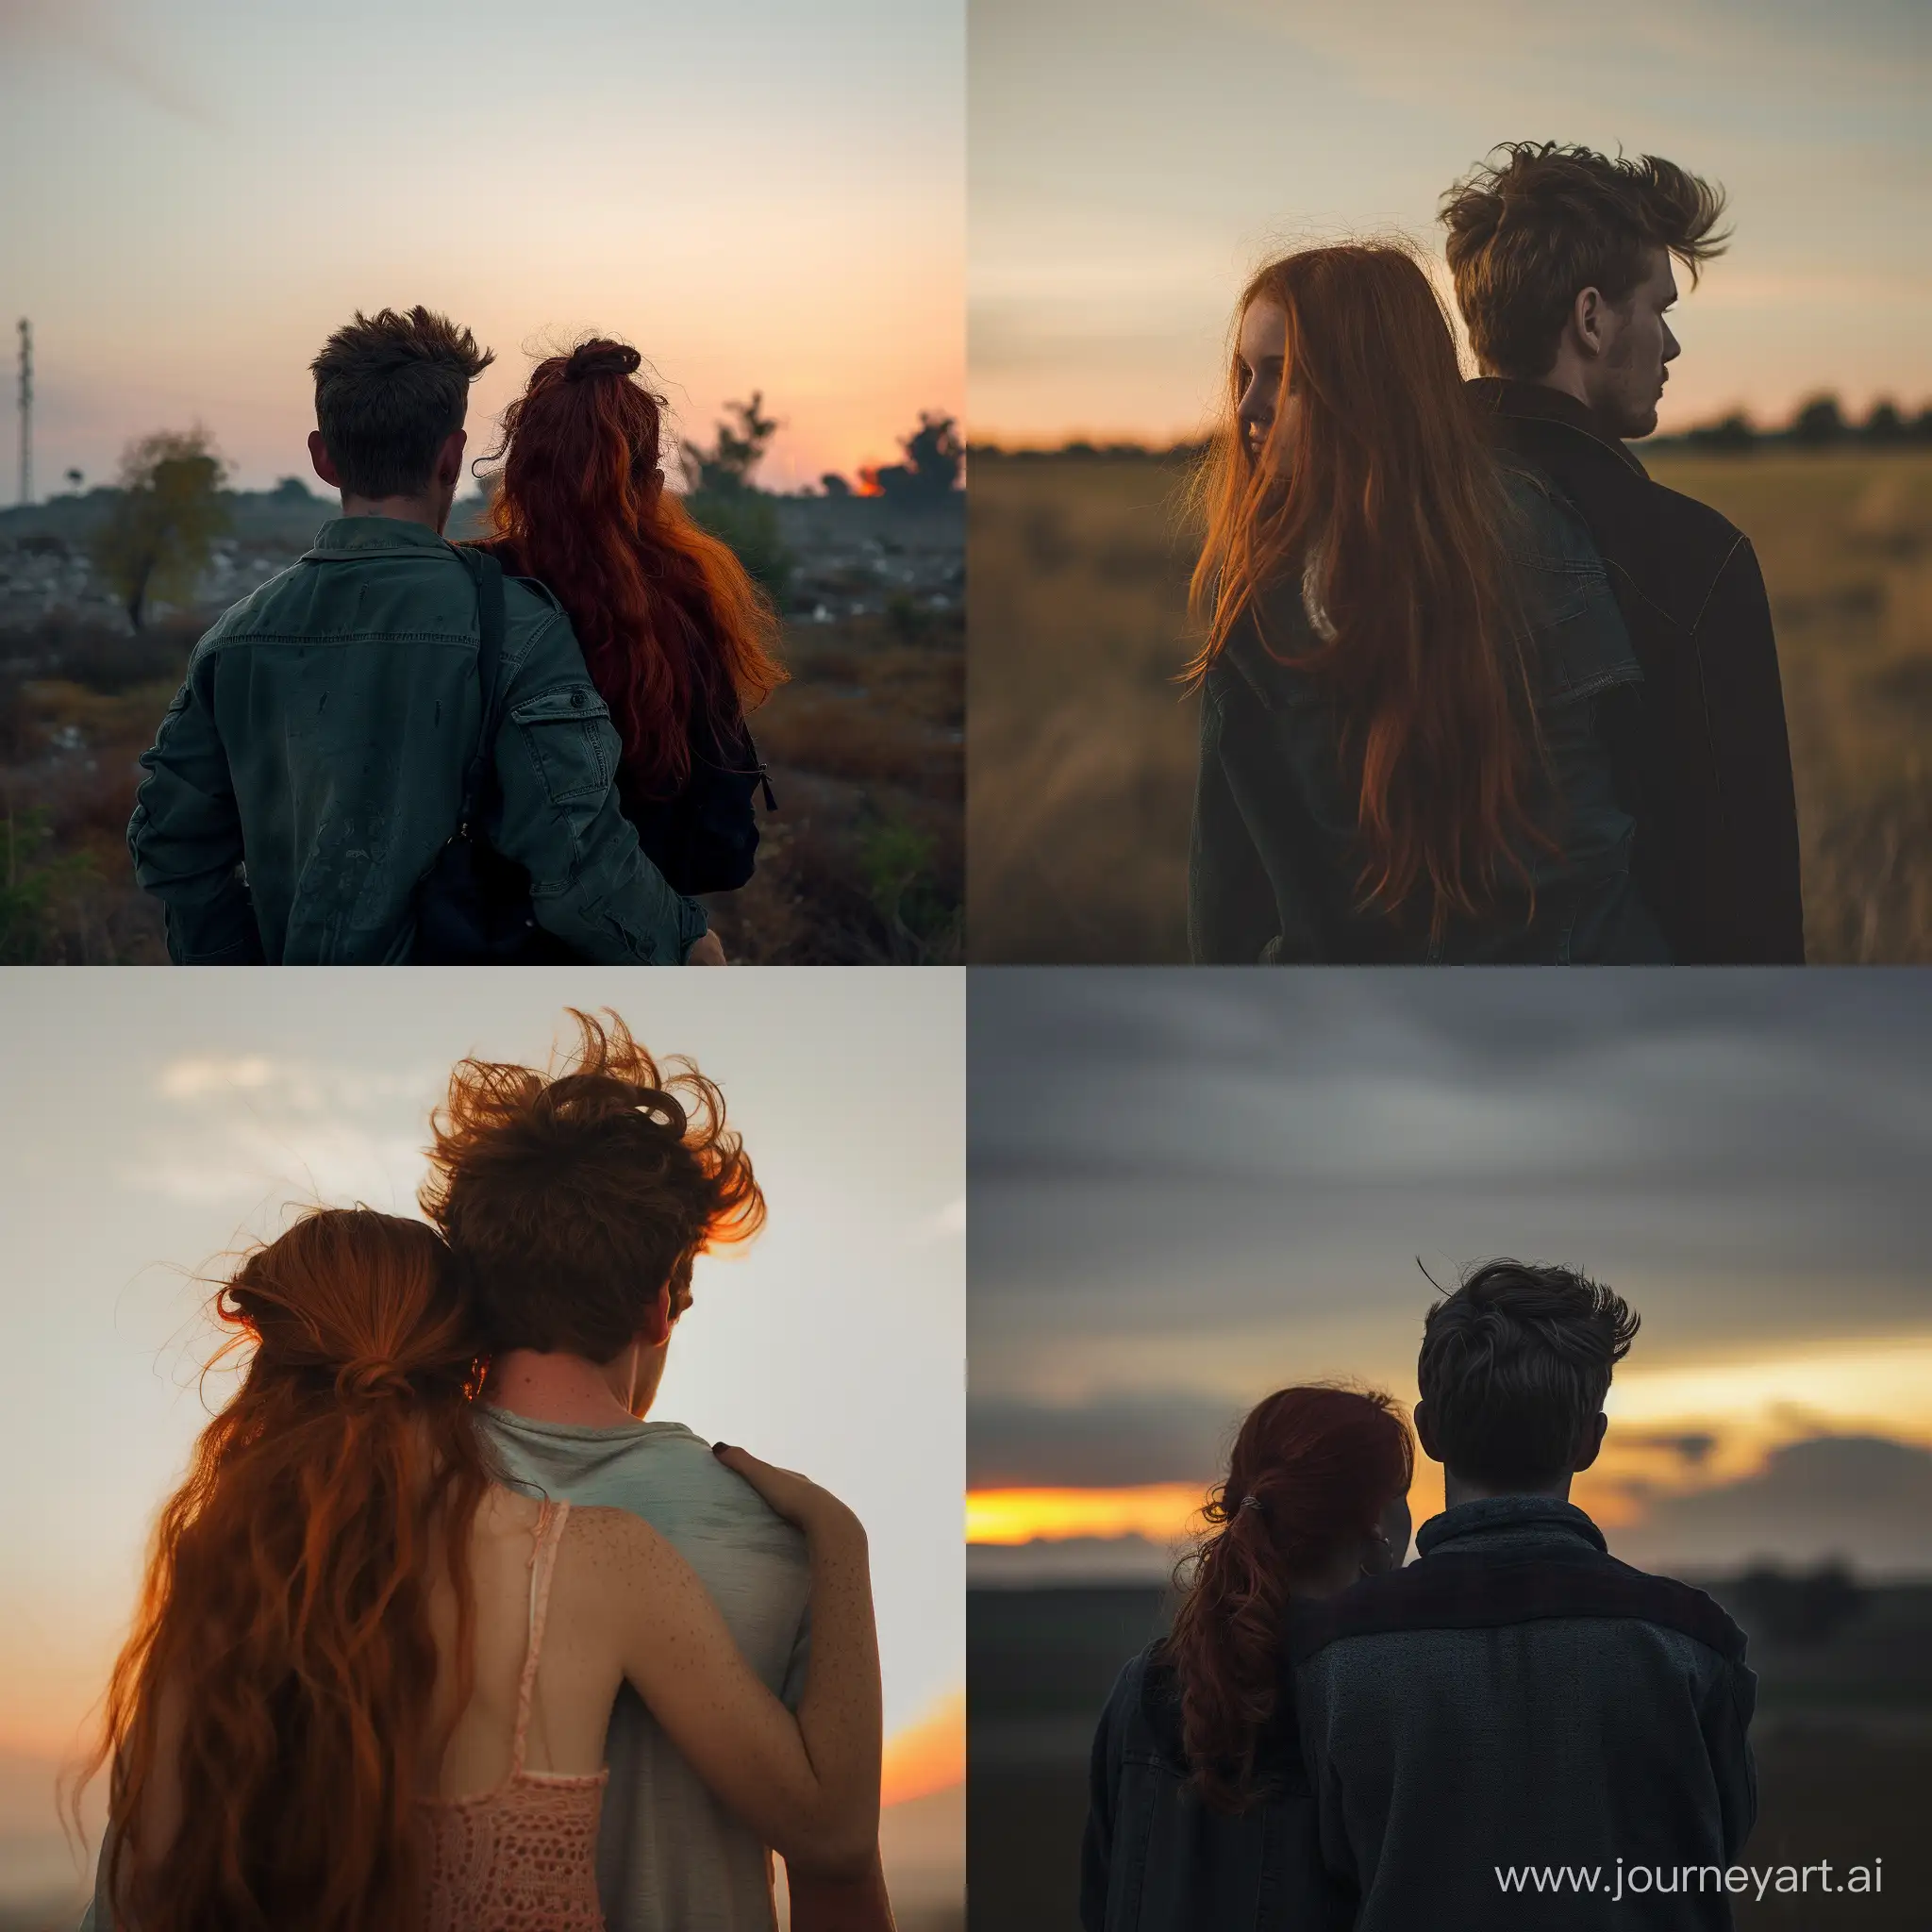 RedHaired-Girl-Riding-on-Mans-Back-at-Sunset